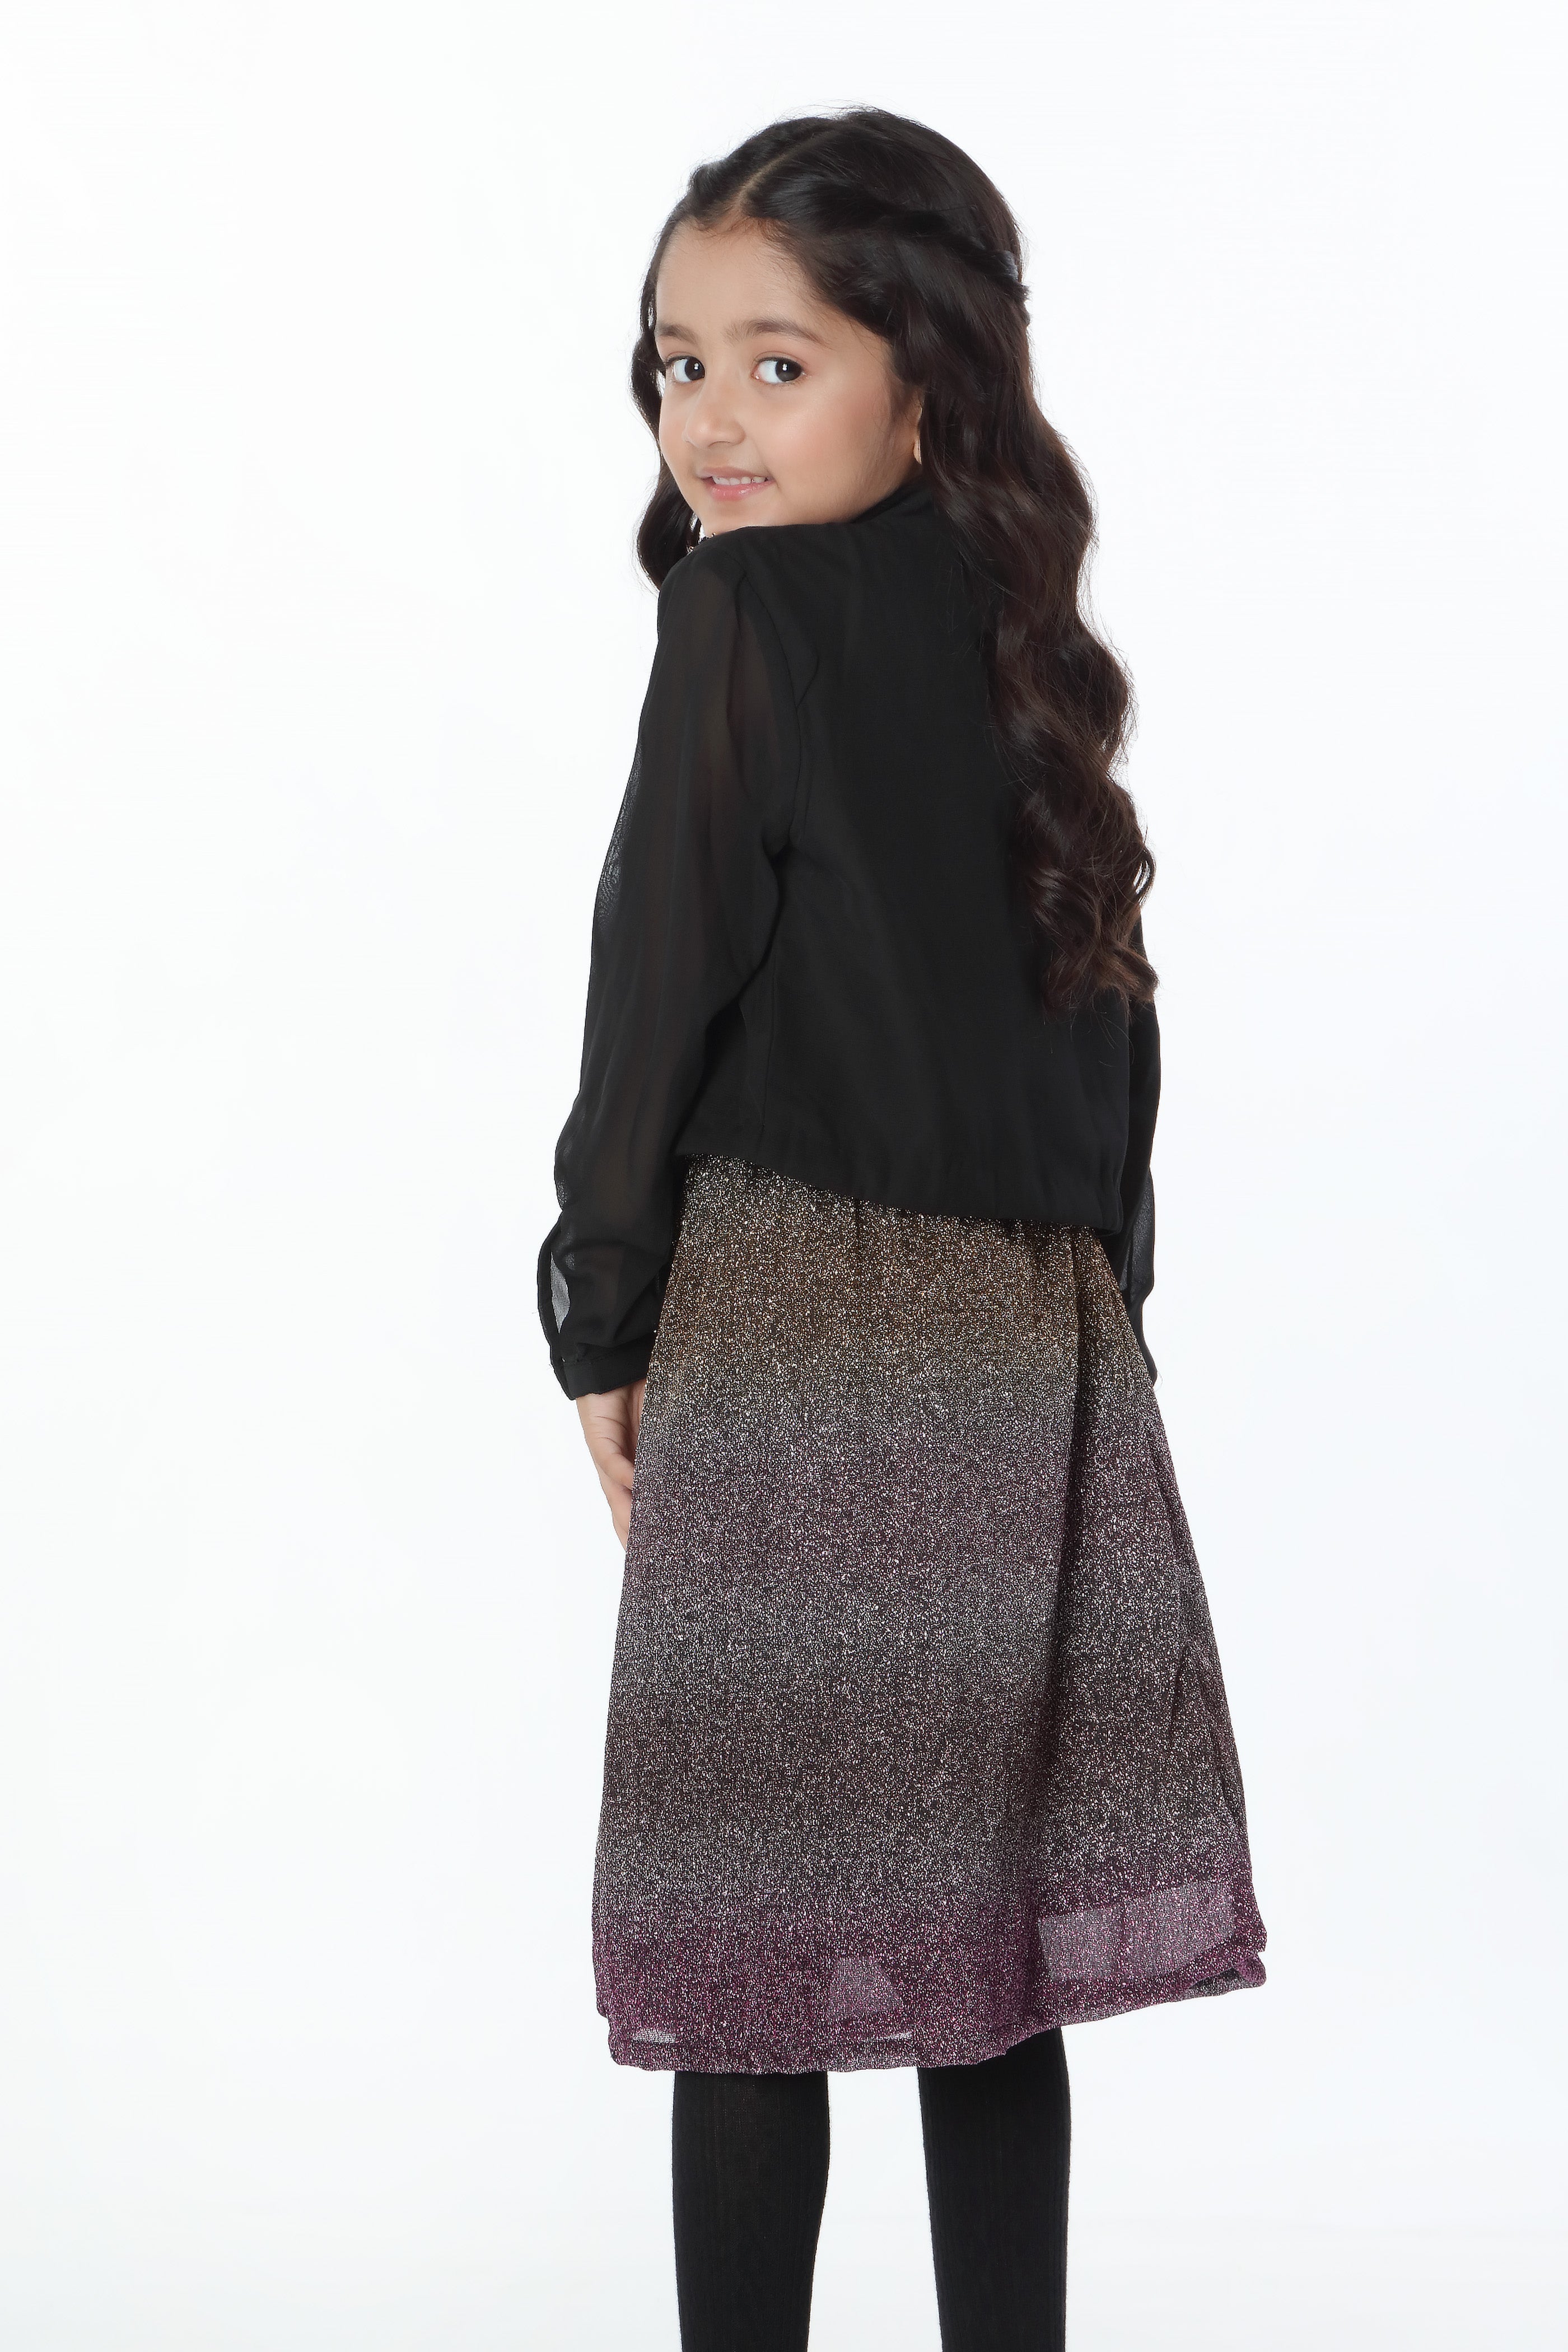 Embellished Top & skirt (MMB-SS40)